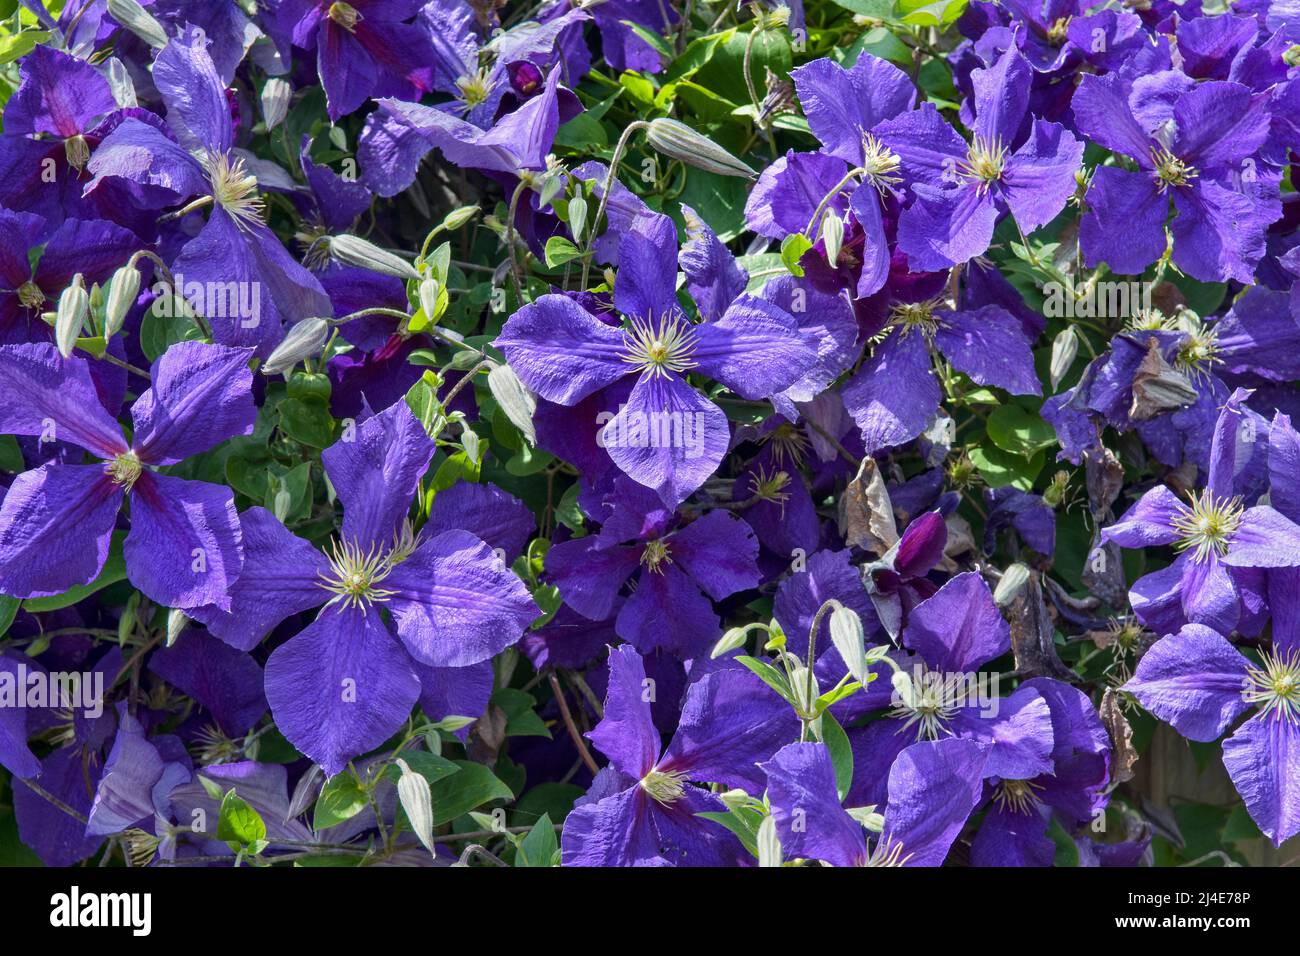 Full frame image of Beautiful deep purple flowering clematis. Jackmanii which has 4 petals Stock Photo